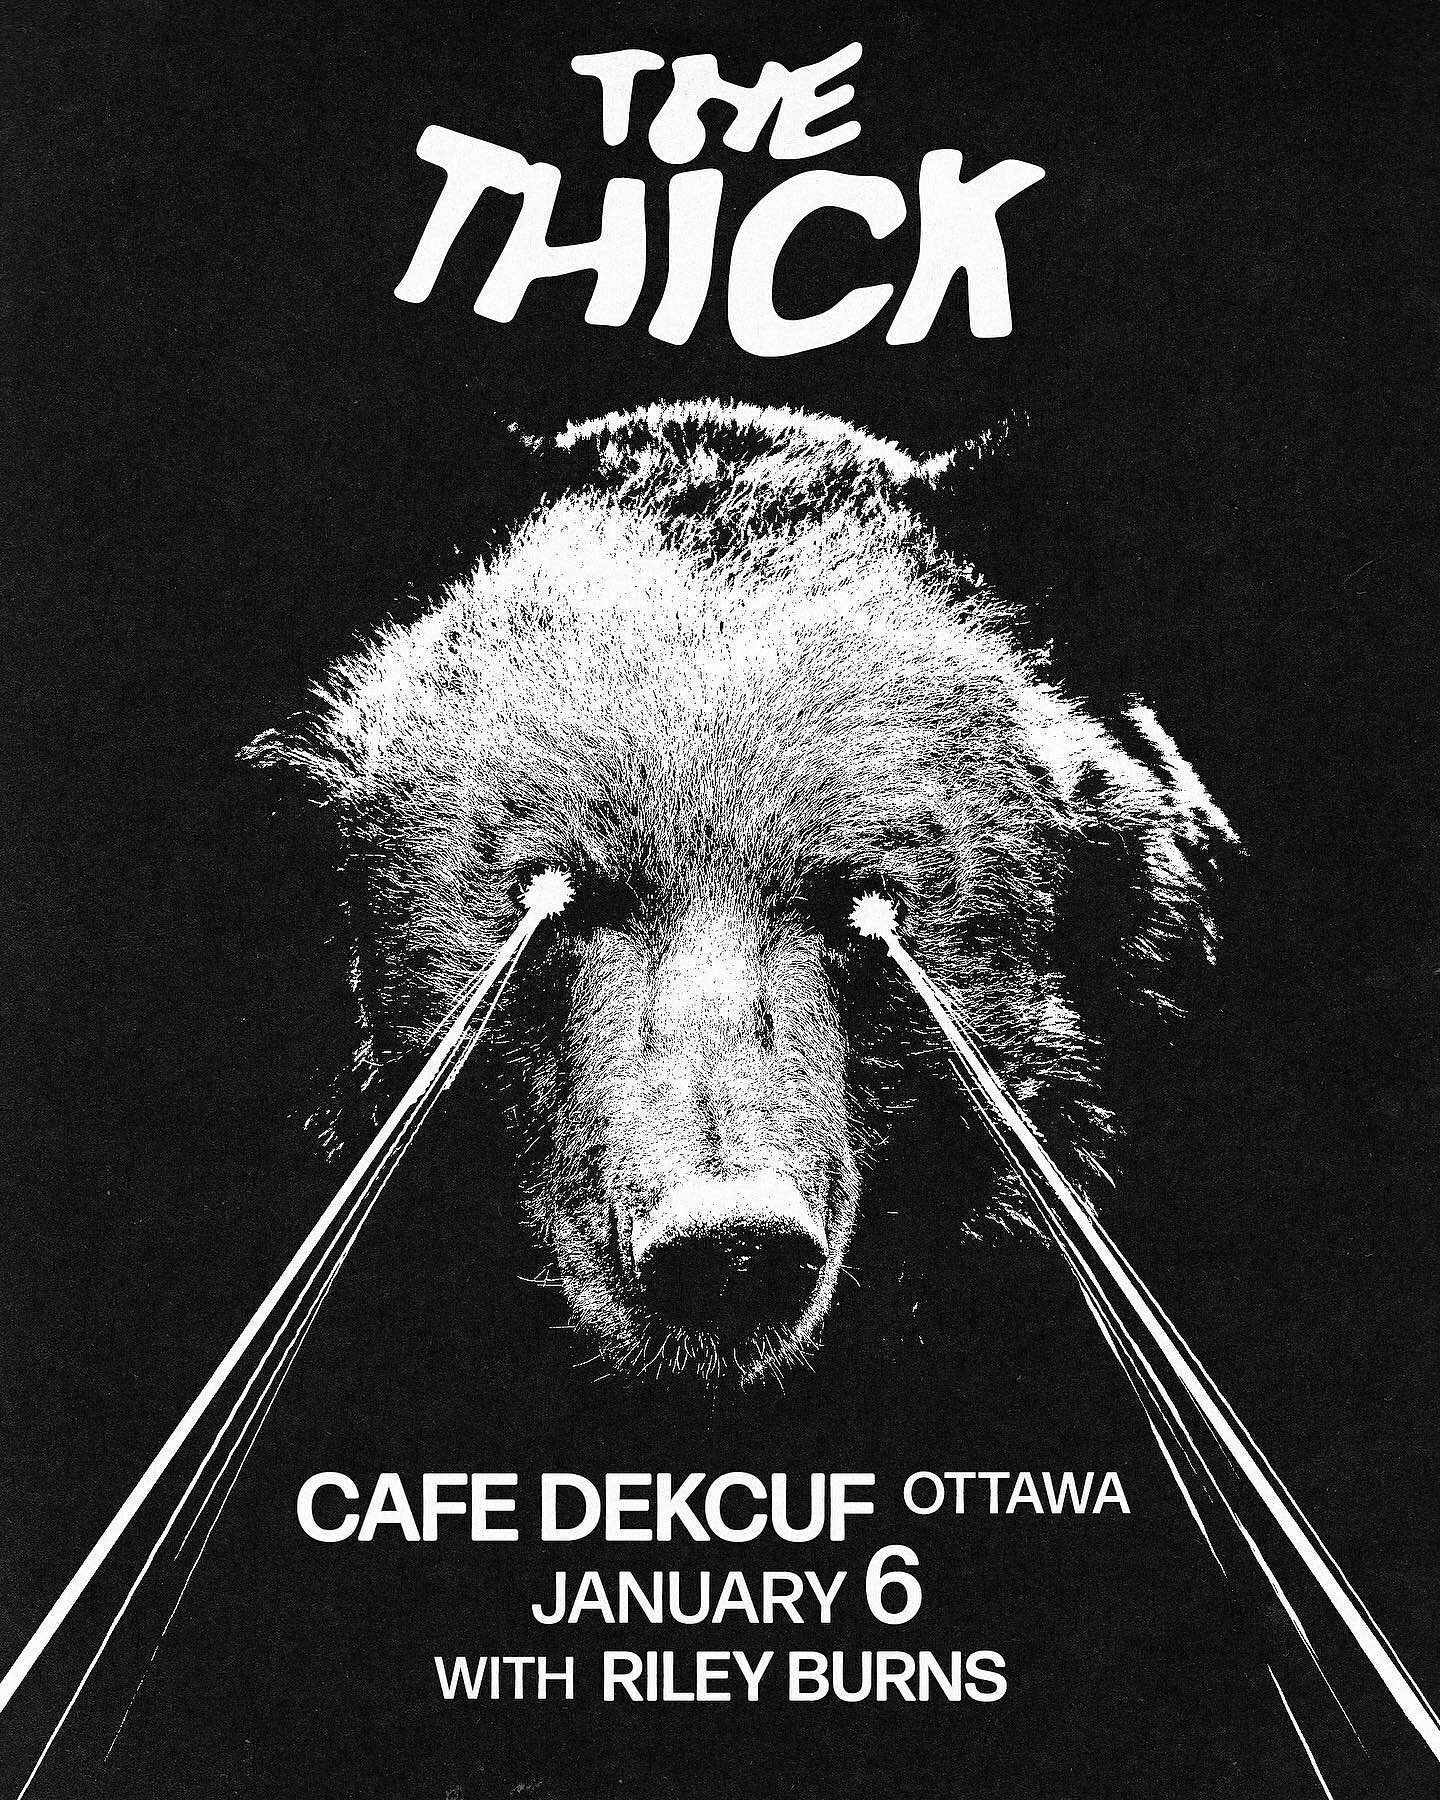 Ottawa! We will see you tonight at the kickoff of our tour @cafedekcuf. Tickets are still available at the door 🎟🚪